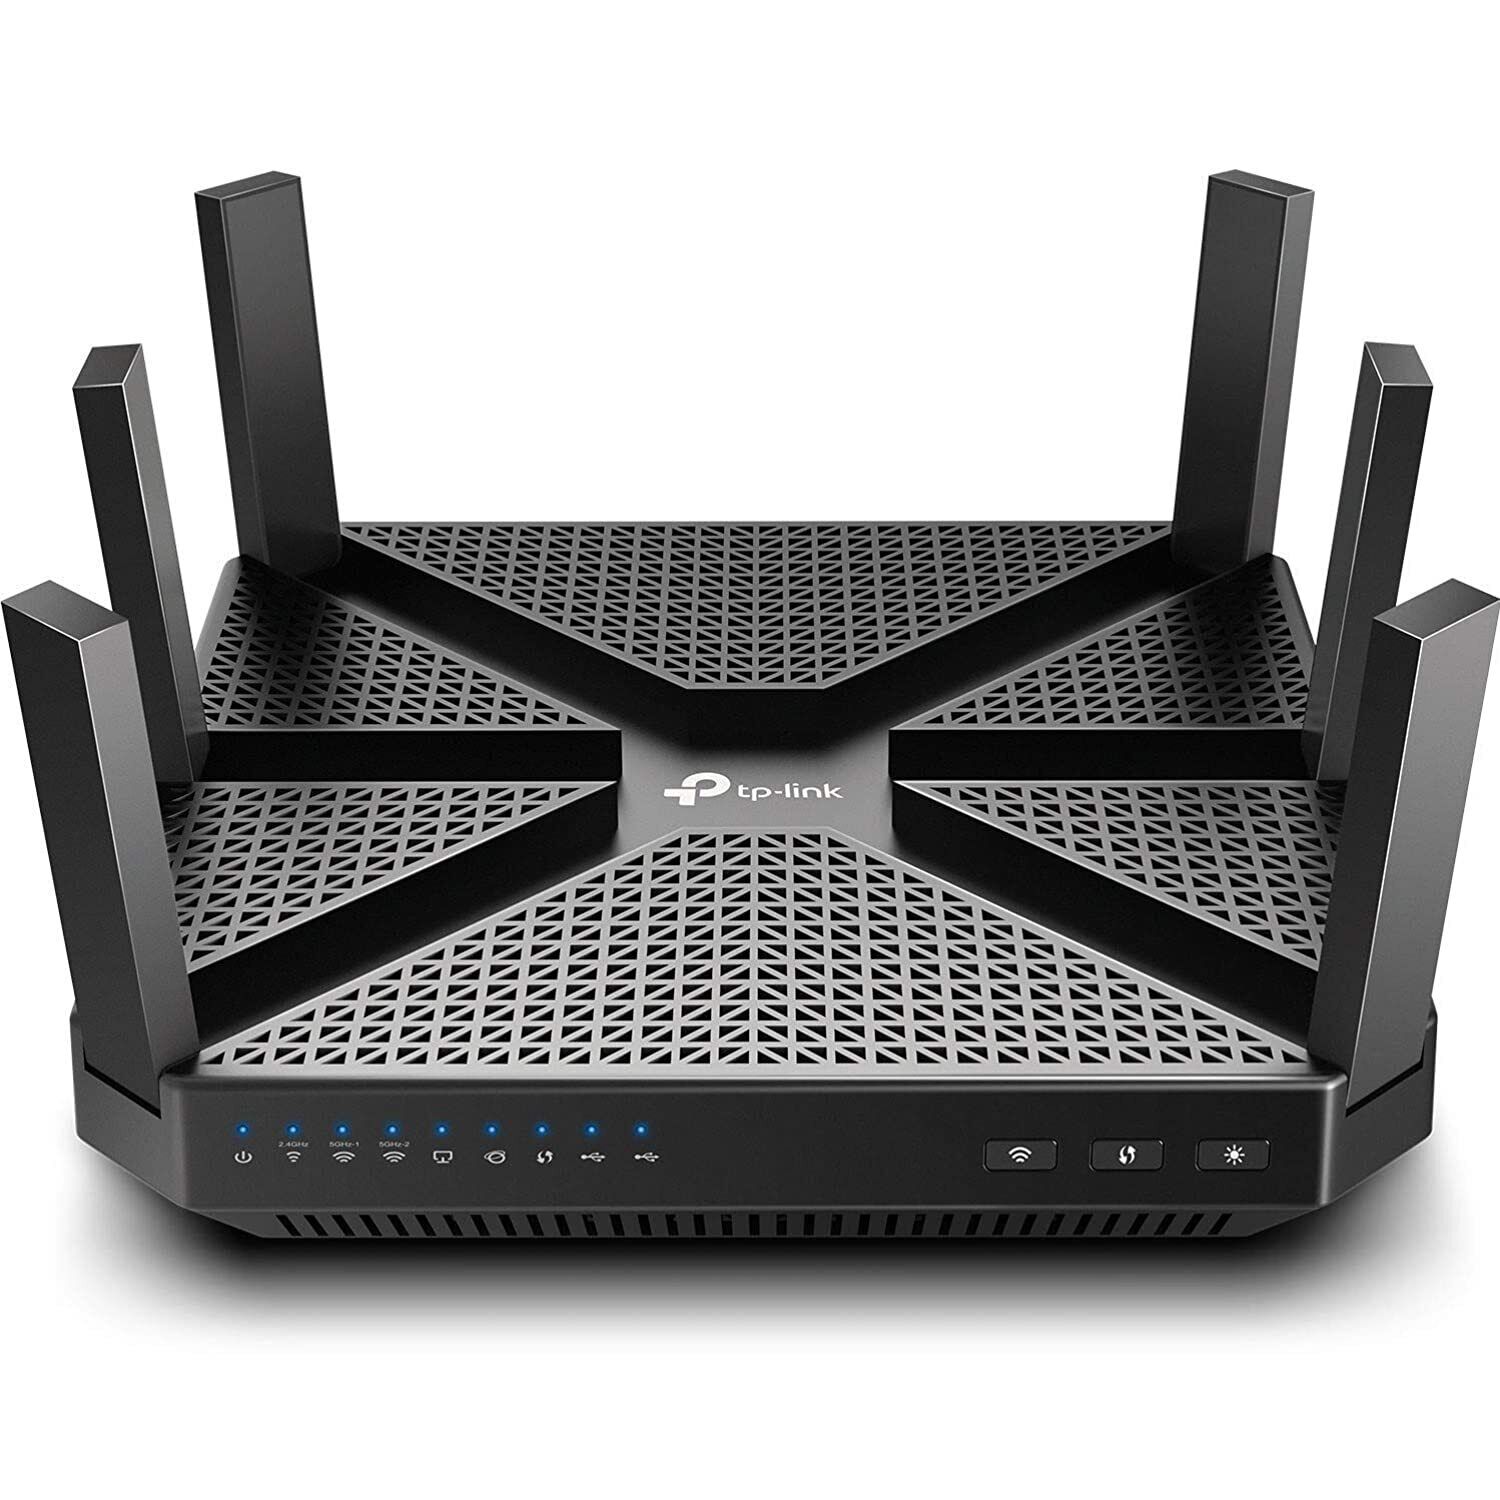 TP-Link AC4000 Smart WiFi Router - Tri Band Router , MU-MIMO, VPN Server, Anti